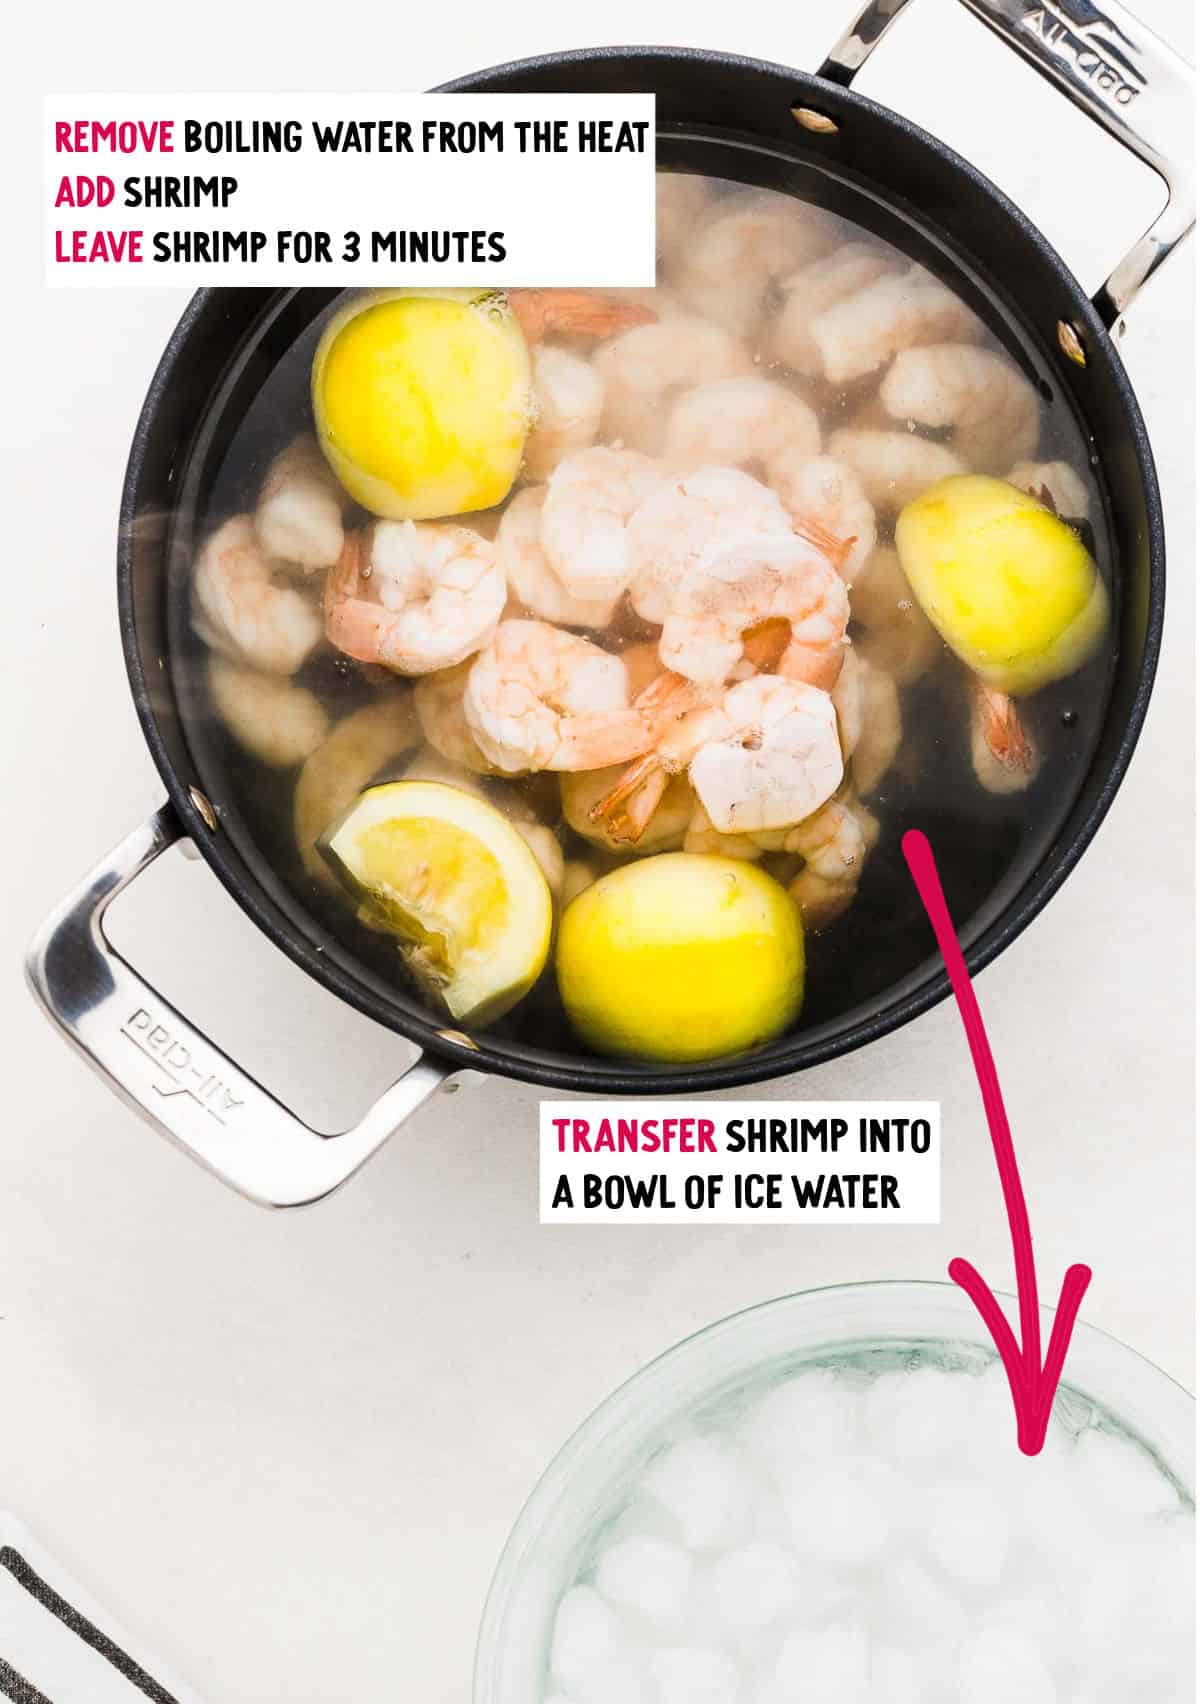 Step: add cooked shrimp into ice water